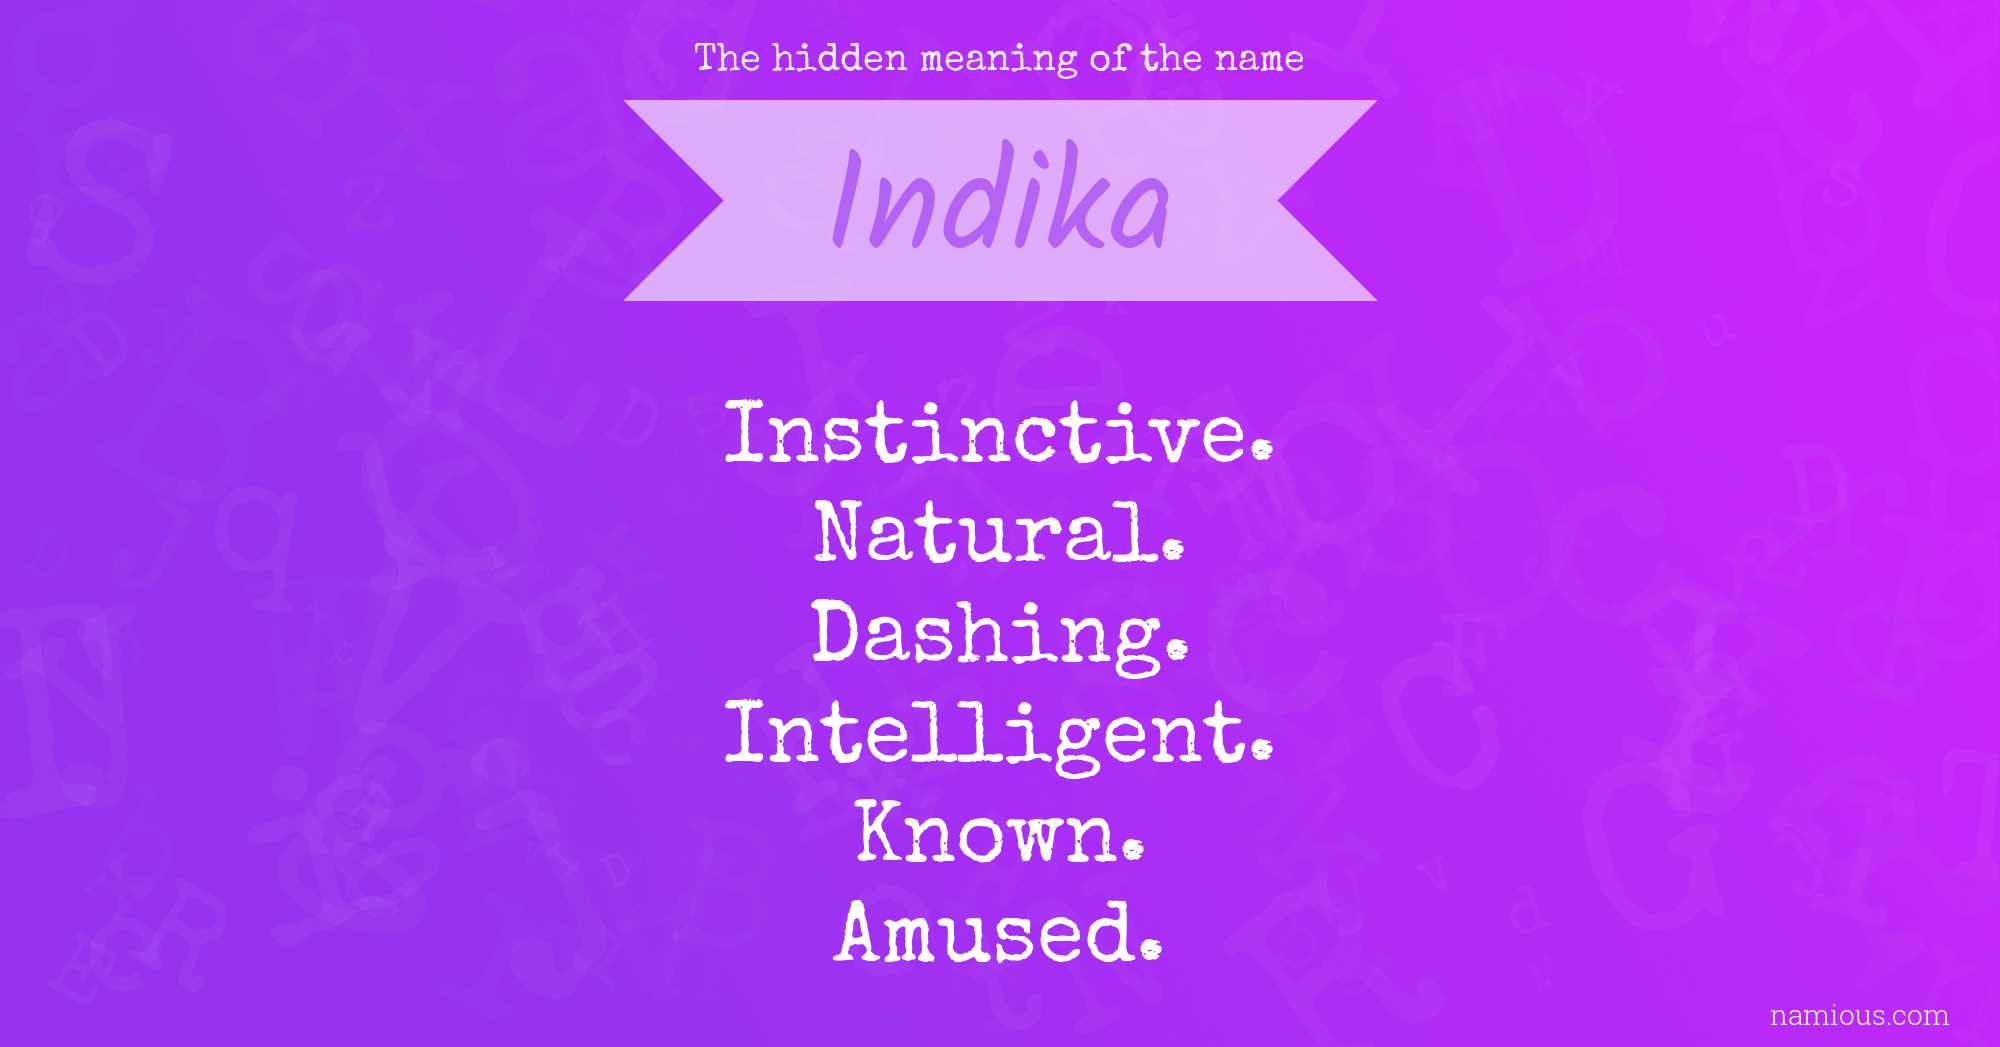 The hidden meaning of the name Indika